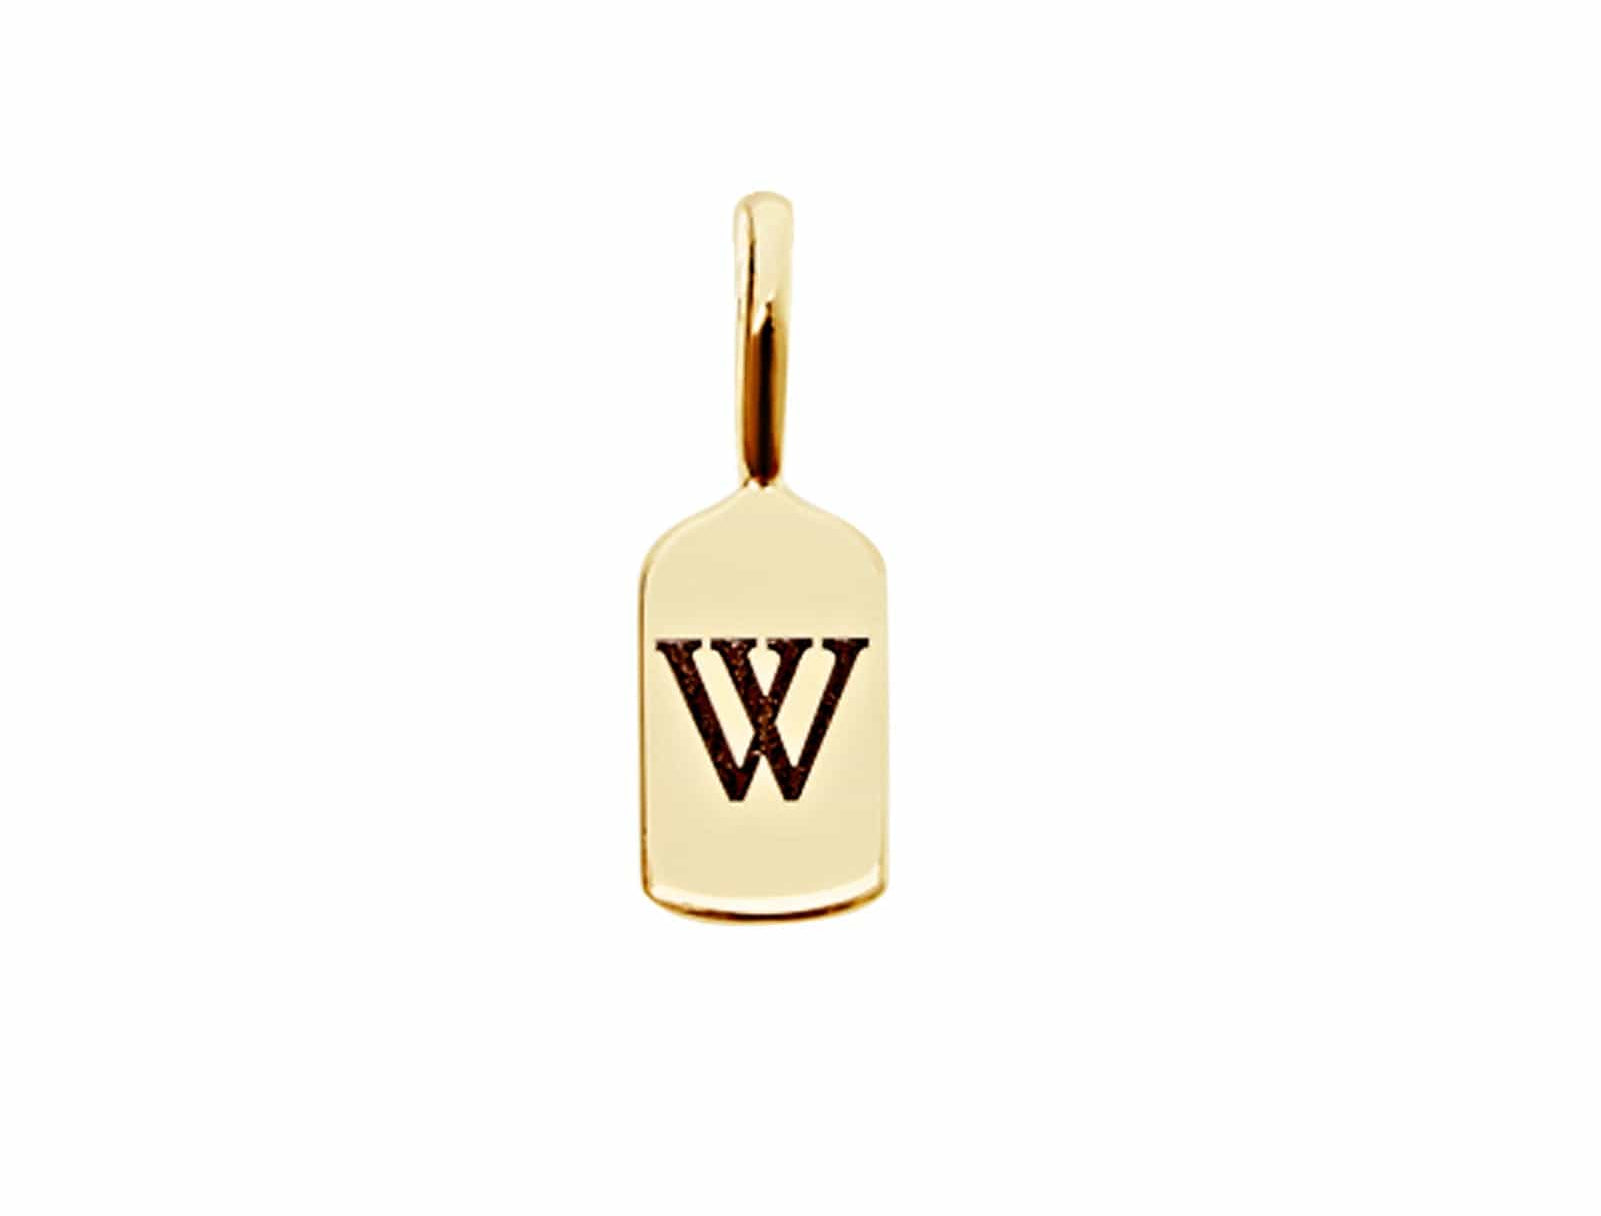 Picture of  Luna Rae solid 9k gold Letter W